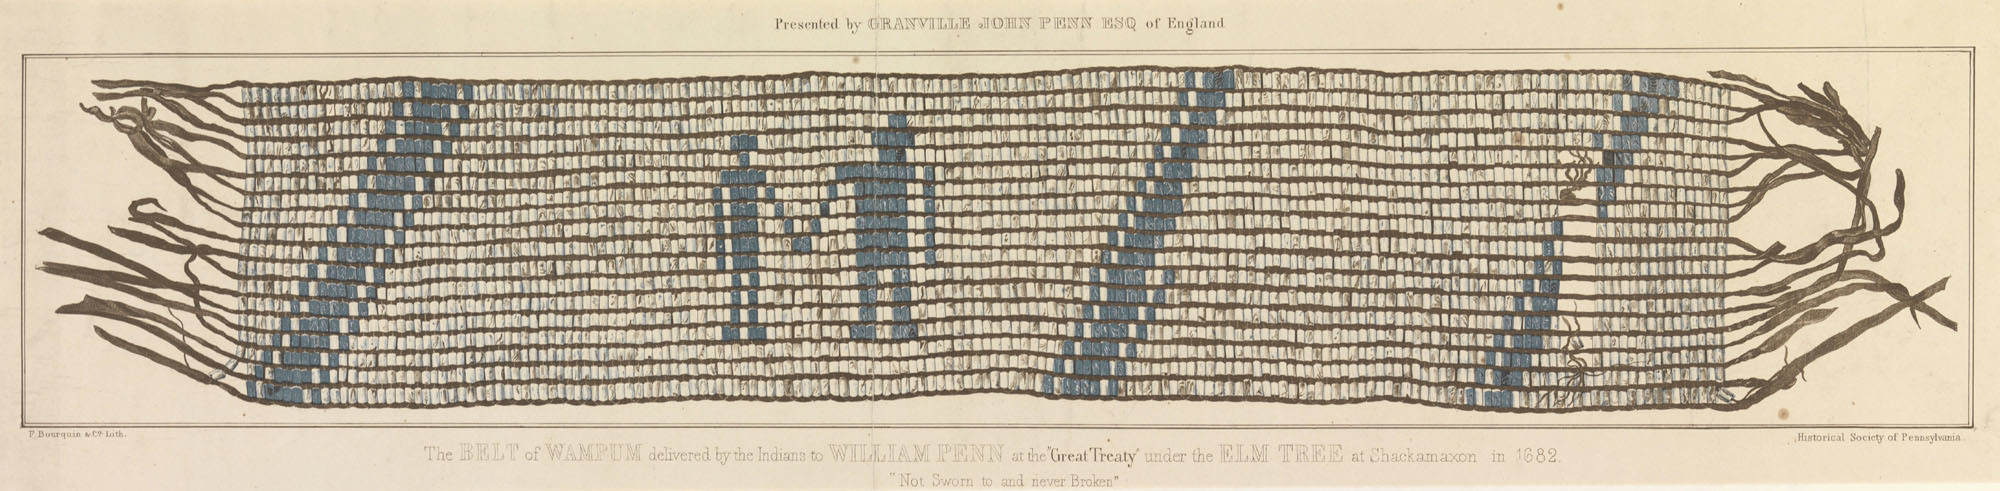 Lithograph reproduction of the wampum belt in fig. 1